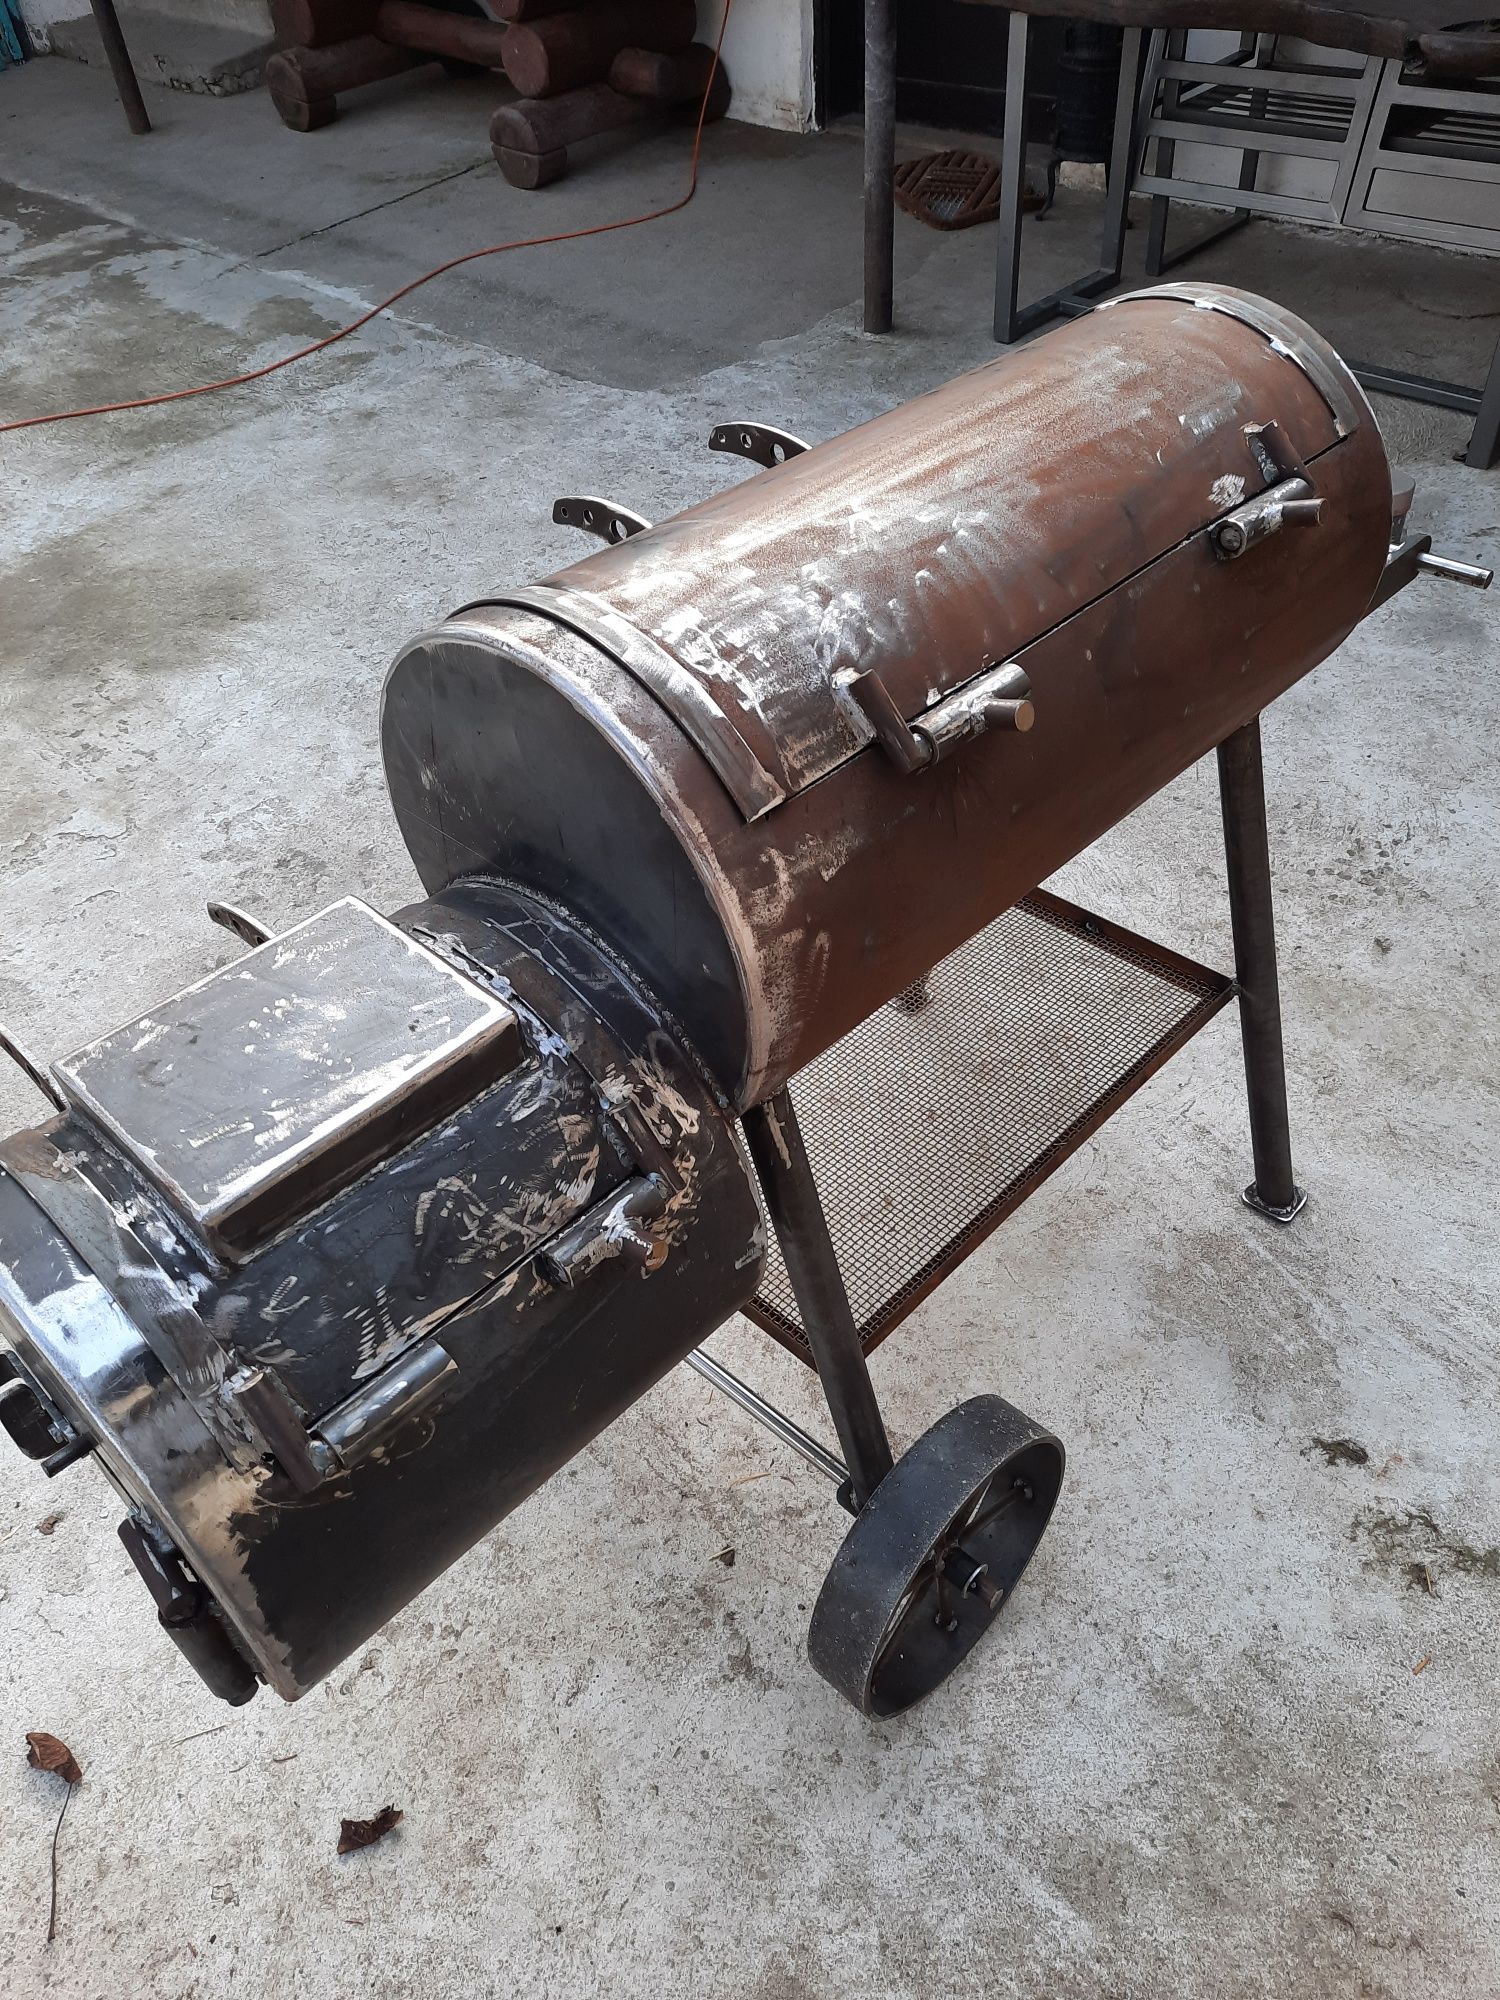 Offset smoker barbecue